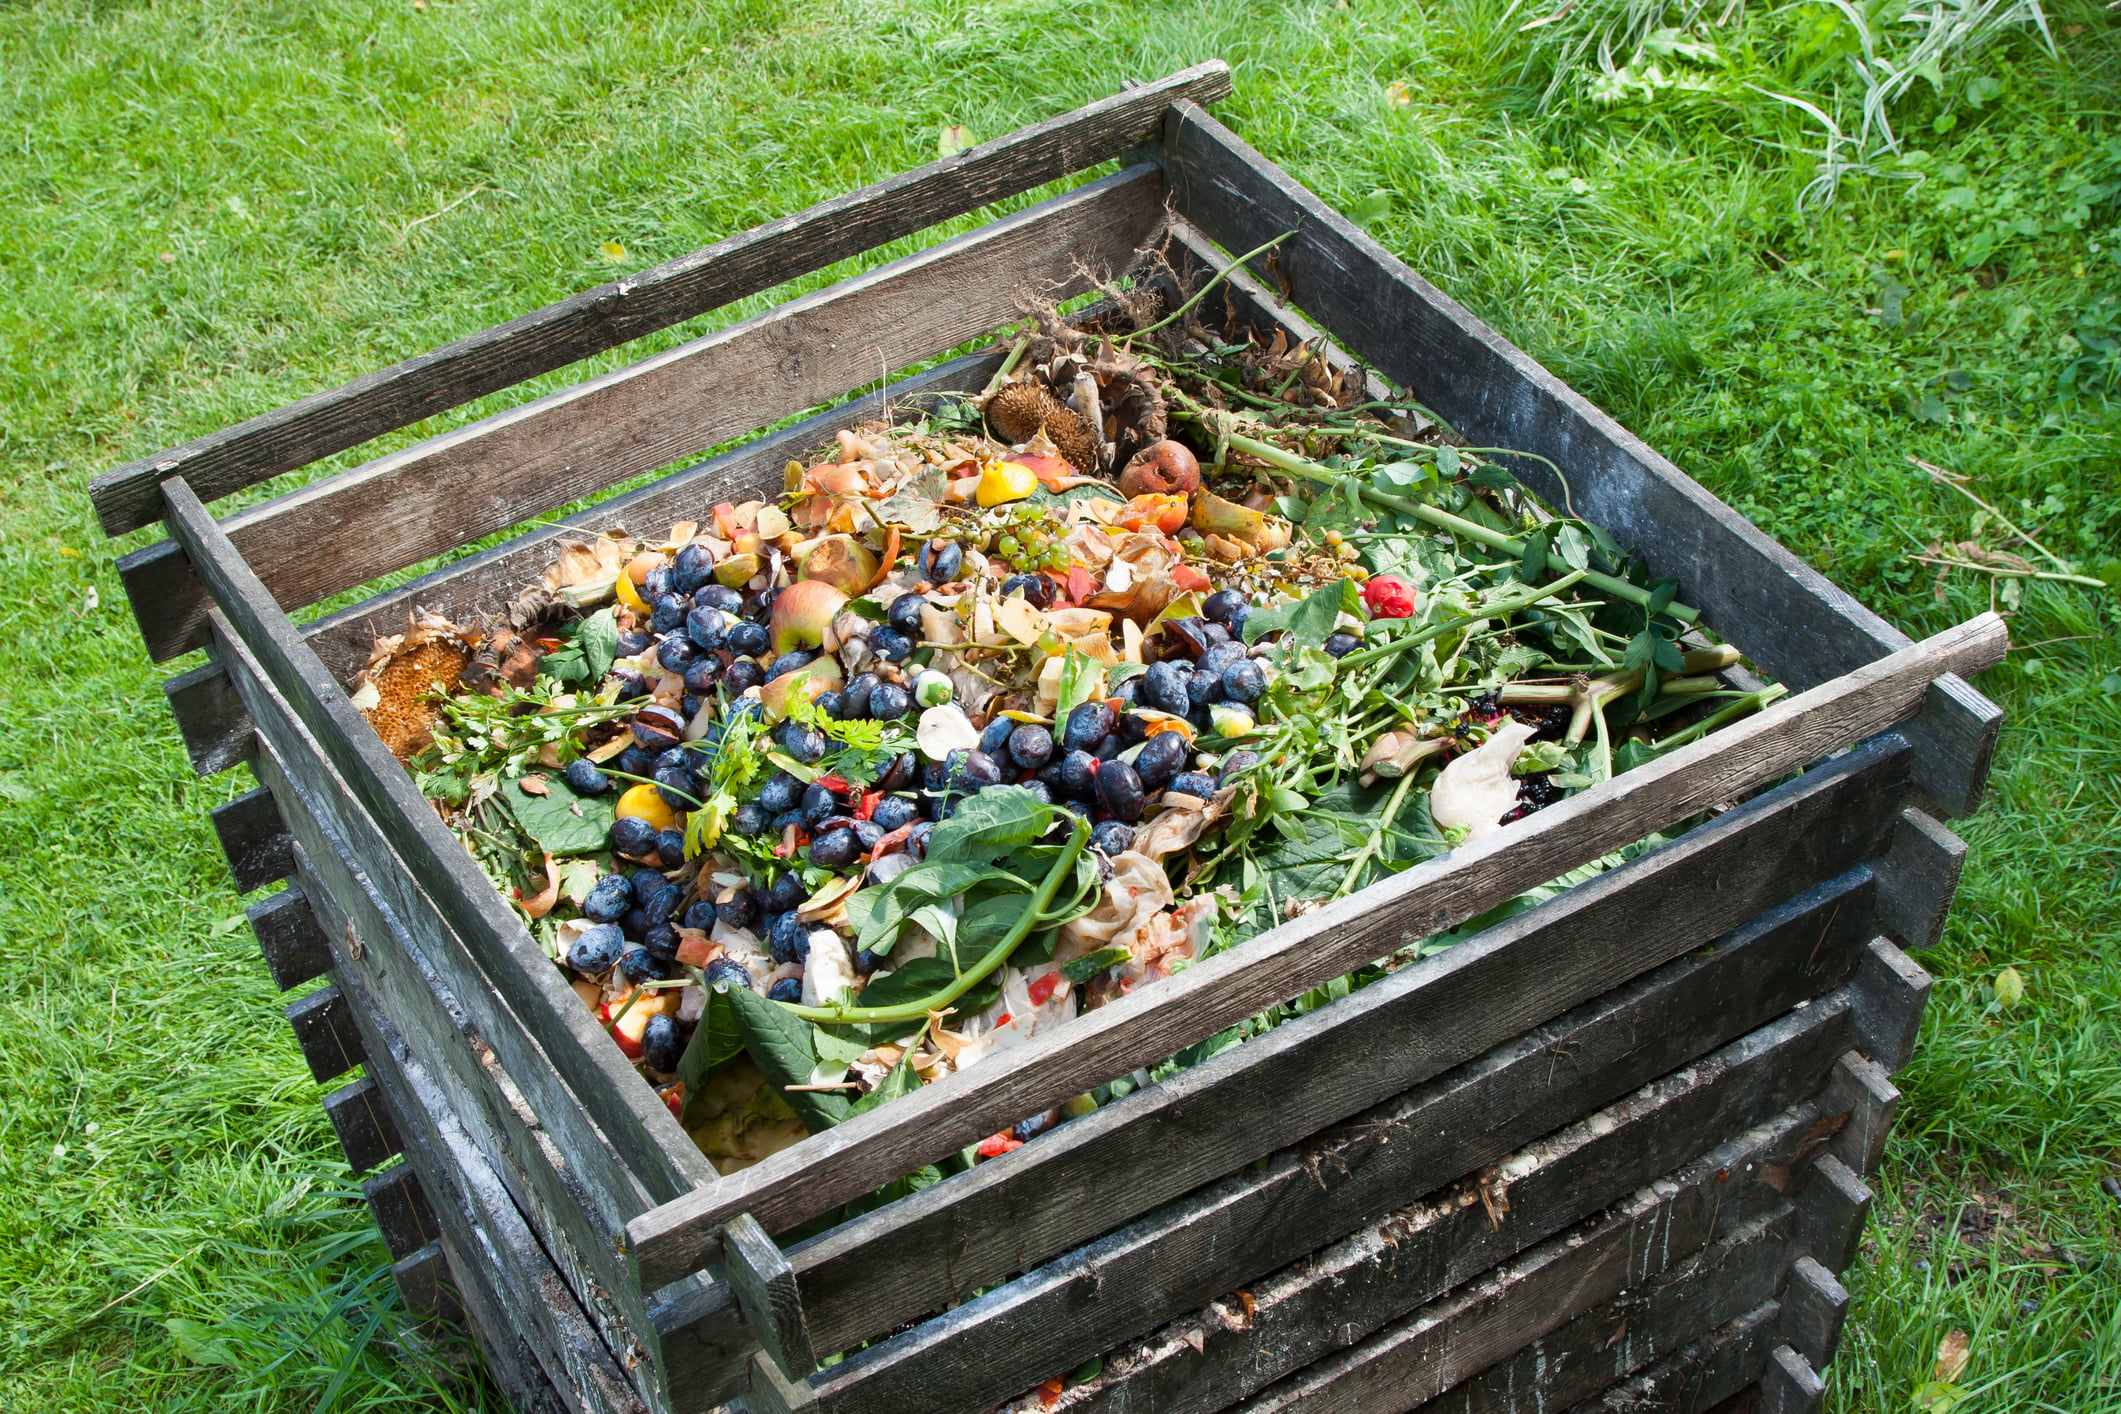 creating compost for an eco-friendly garden out of organic waste